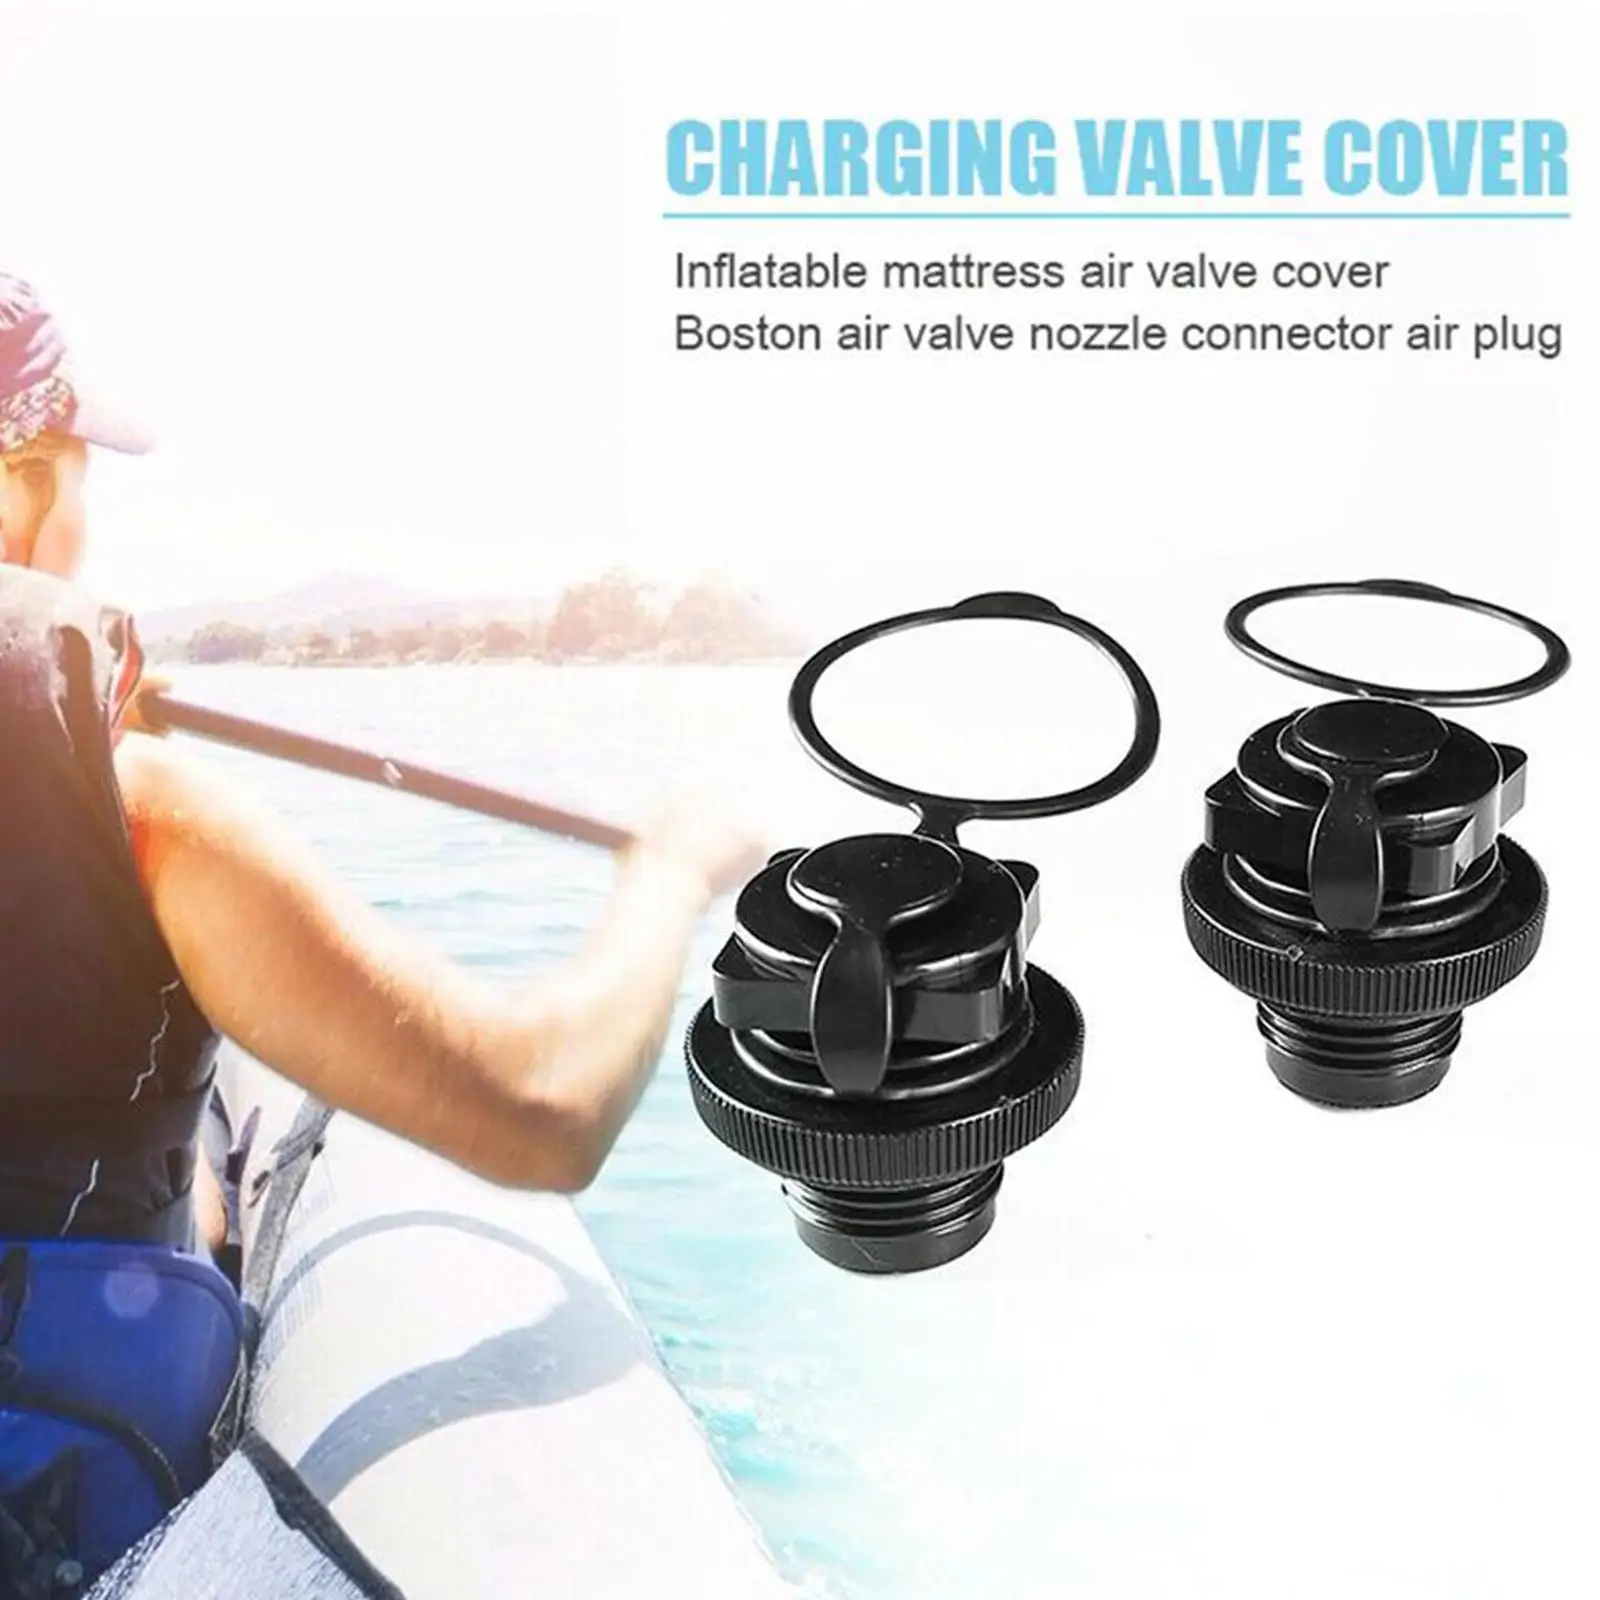 

Kayak Air Valve Cover Canoe Outer Diameter 22MM/0.8" Strong Anti-corrosion Durable One-way Inflation Valve For Inflatable B F6L0